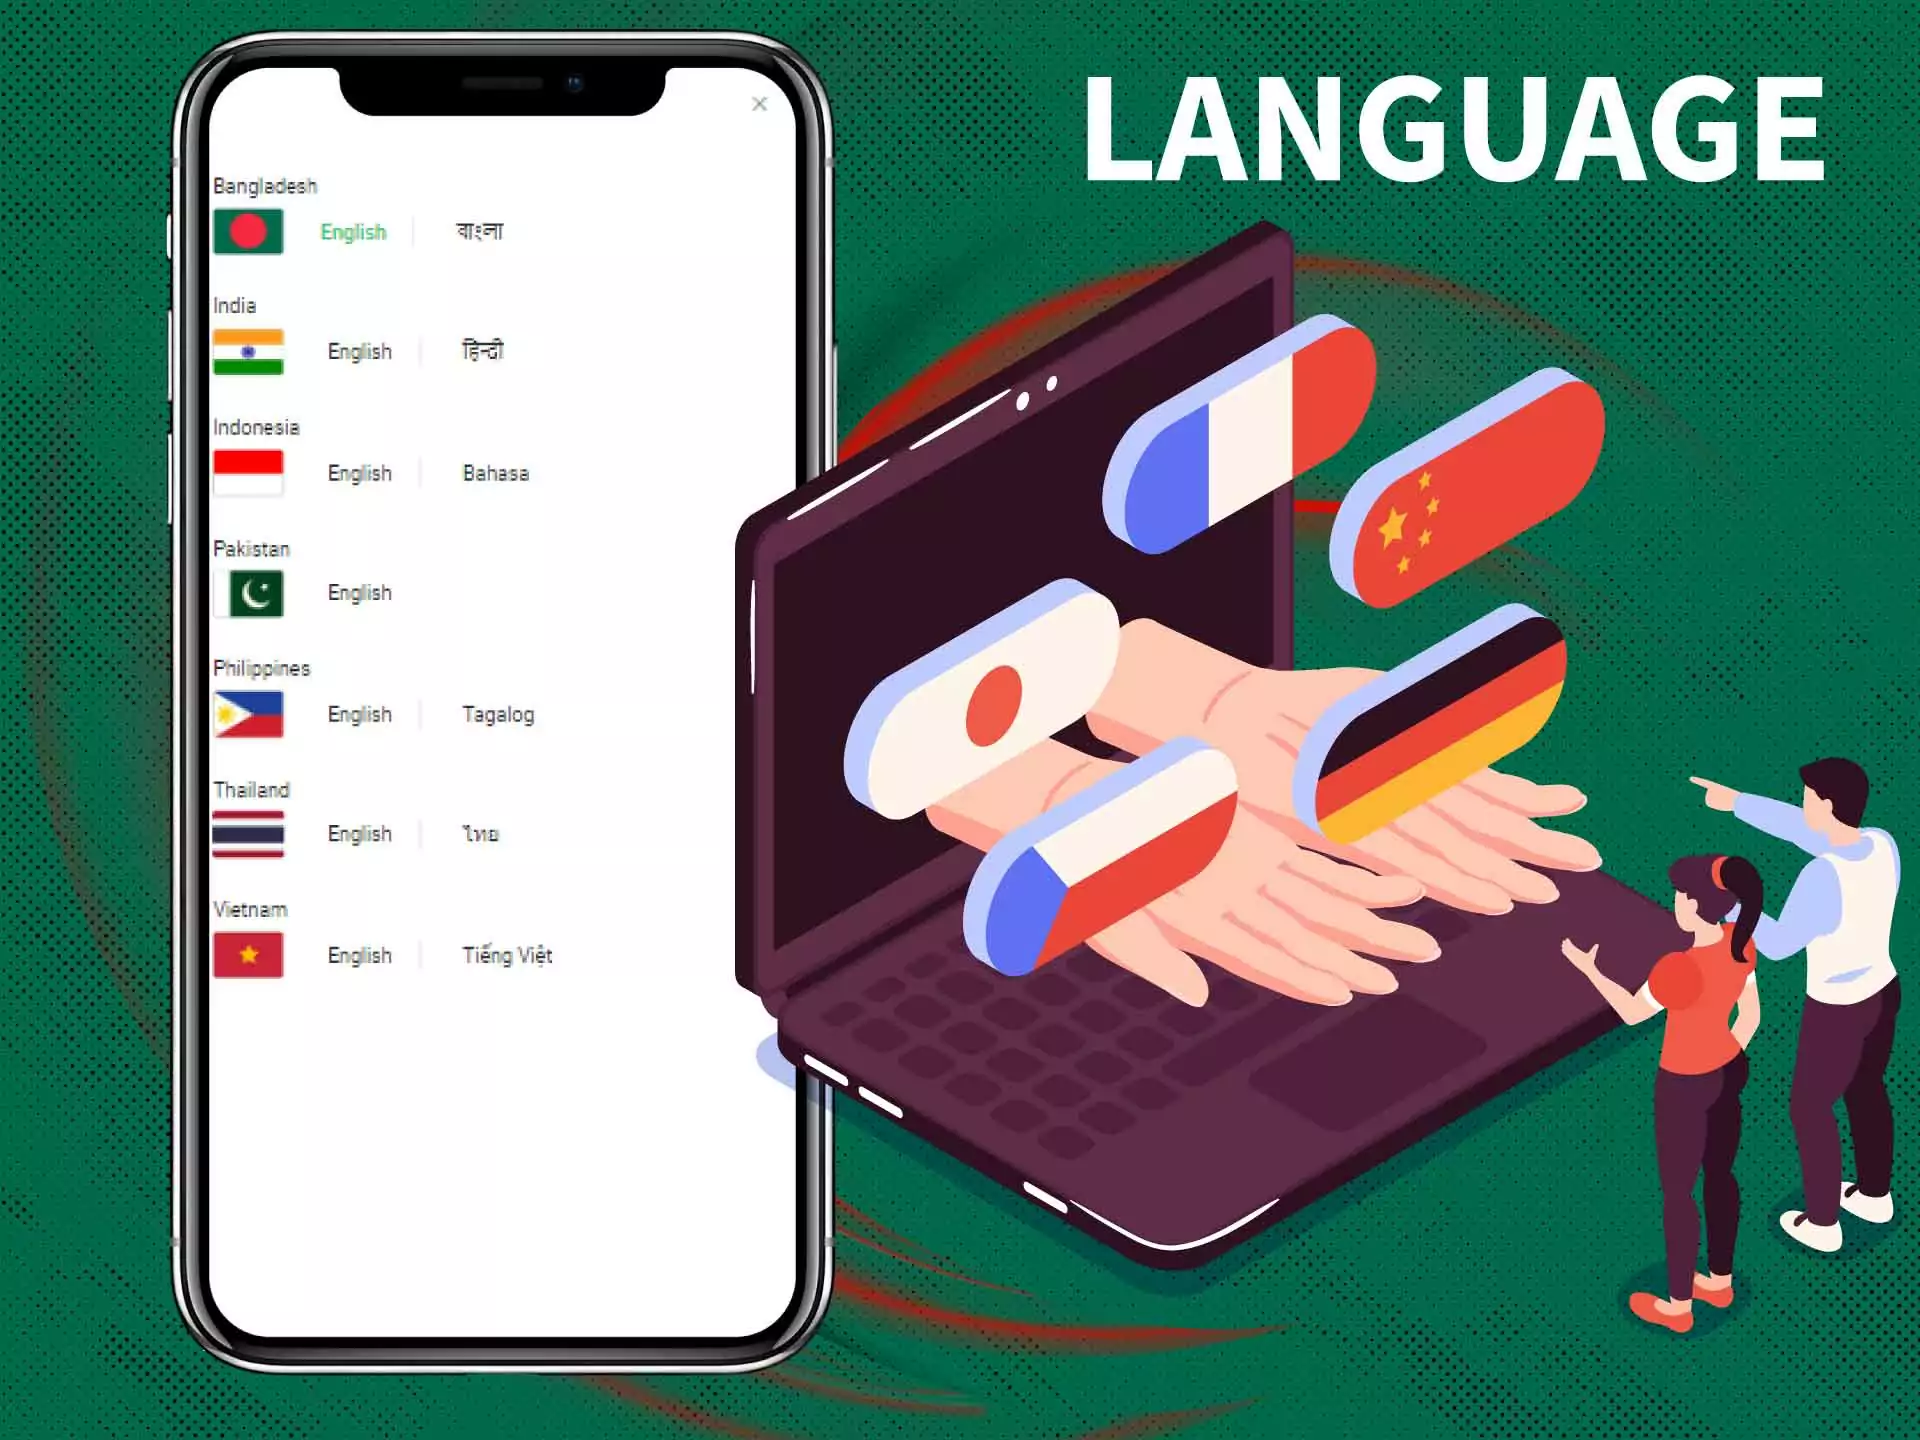 Betvisa supports Bengali and many other languages in its app.